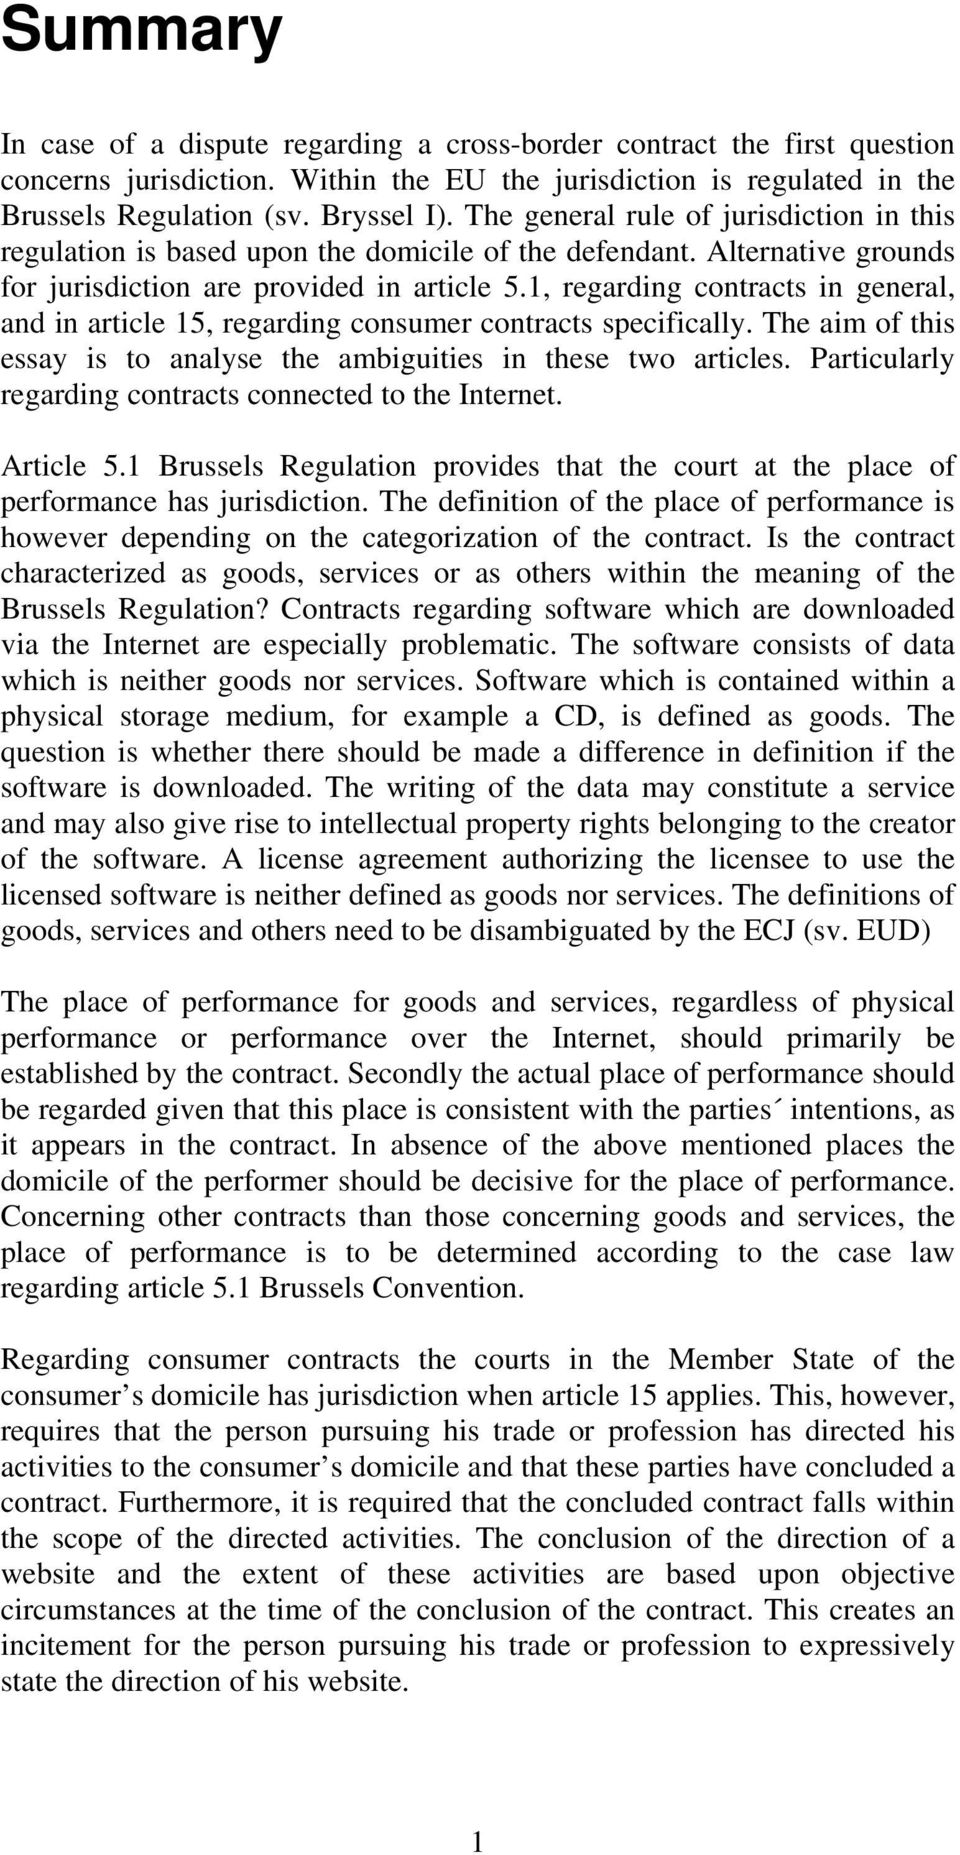 1, regarding contracts in general, and in article 15, regarding consumer contracts specifically. The aim of this essay is to analyse the ambiguities in these two articles.